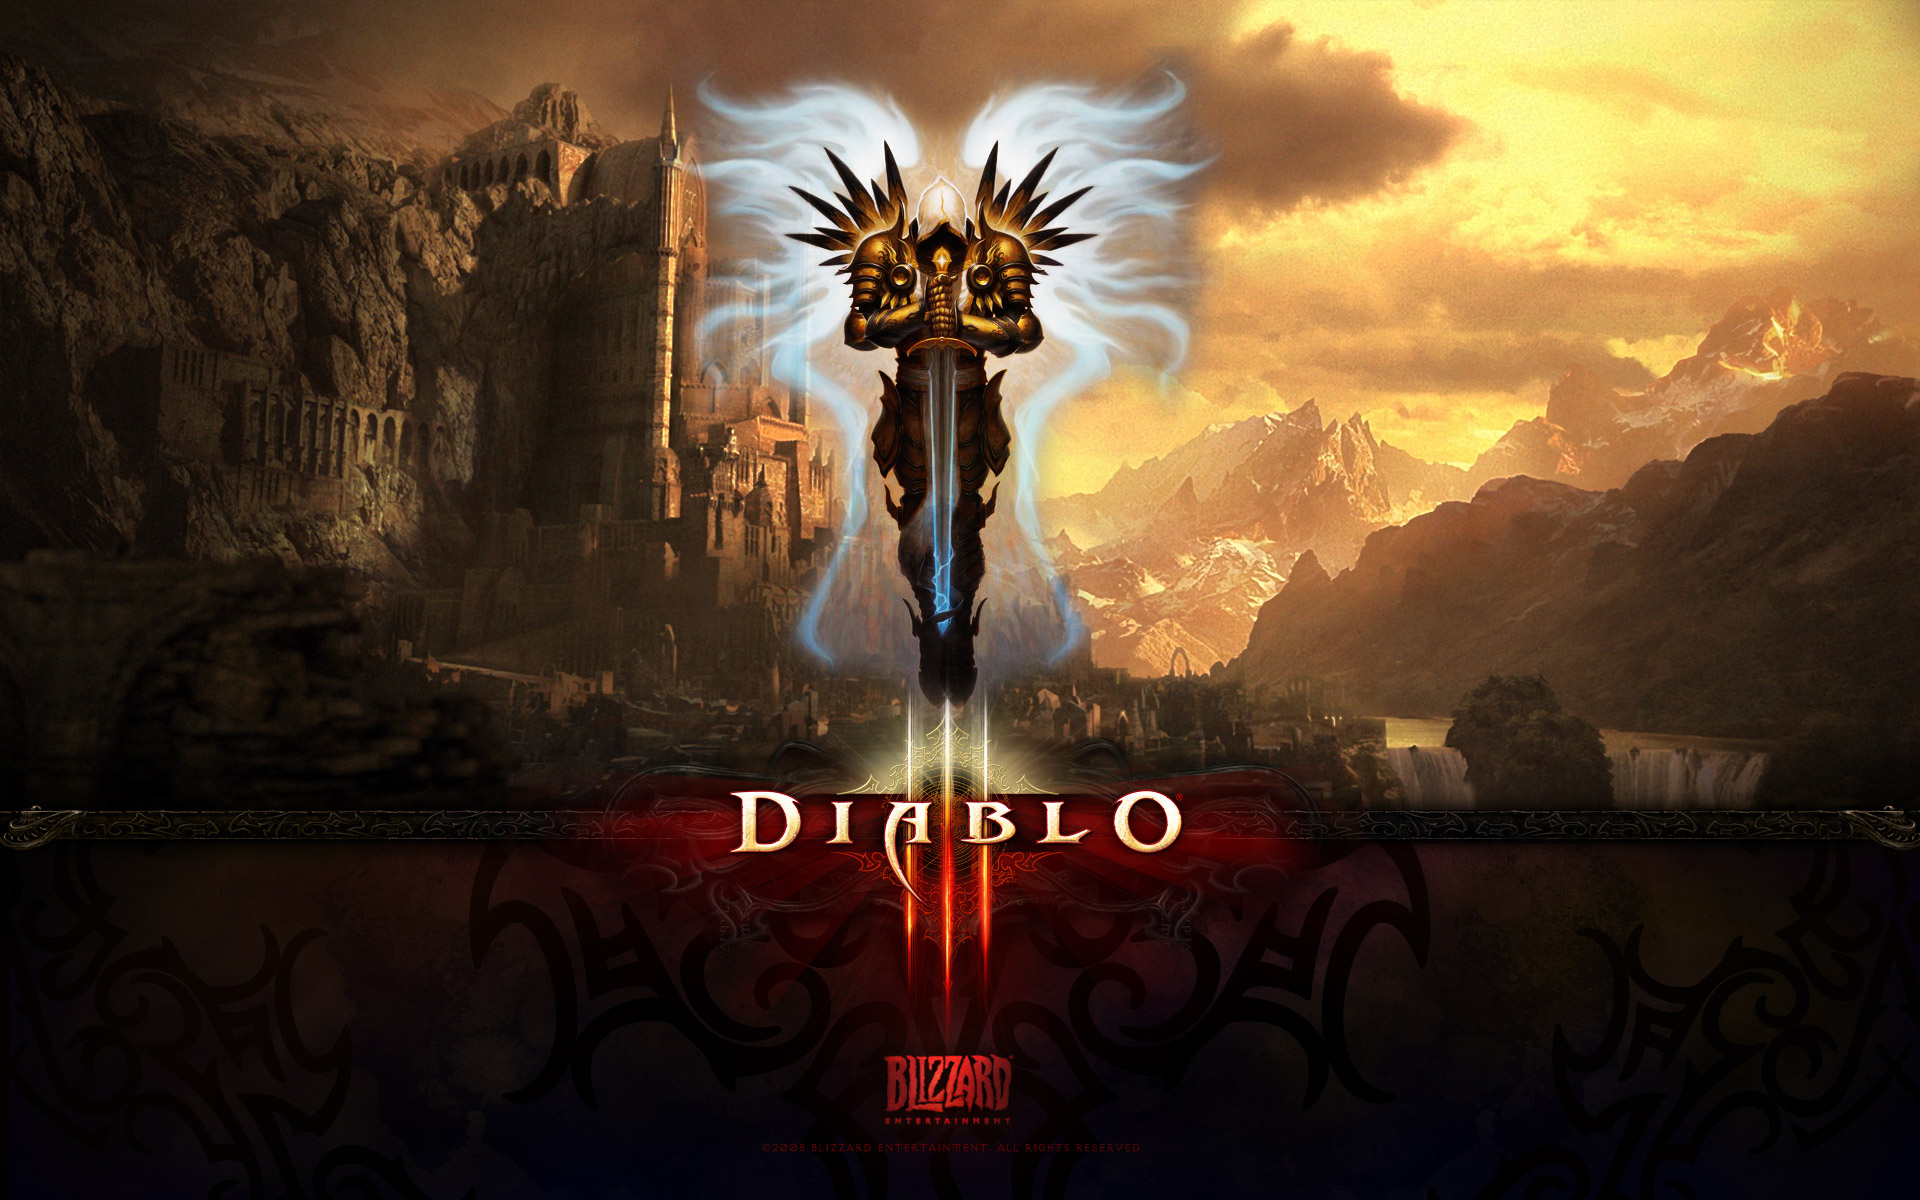 Tyrael, the iconic angel from Diablo III, stands tall in this captivating desktop wallpaper for video game enthusiasts.